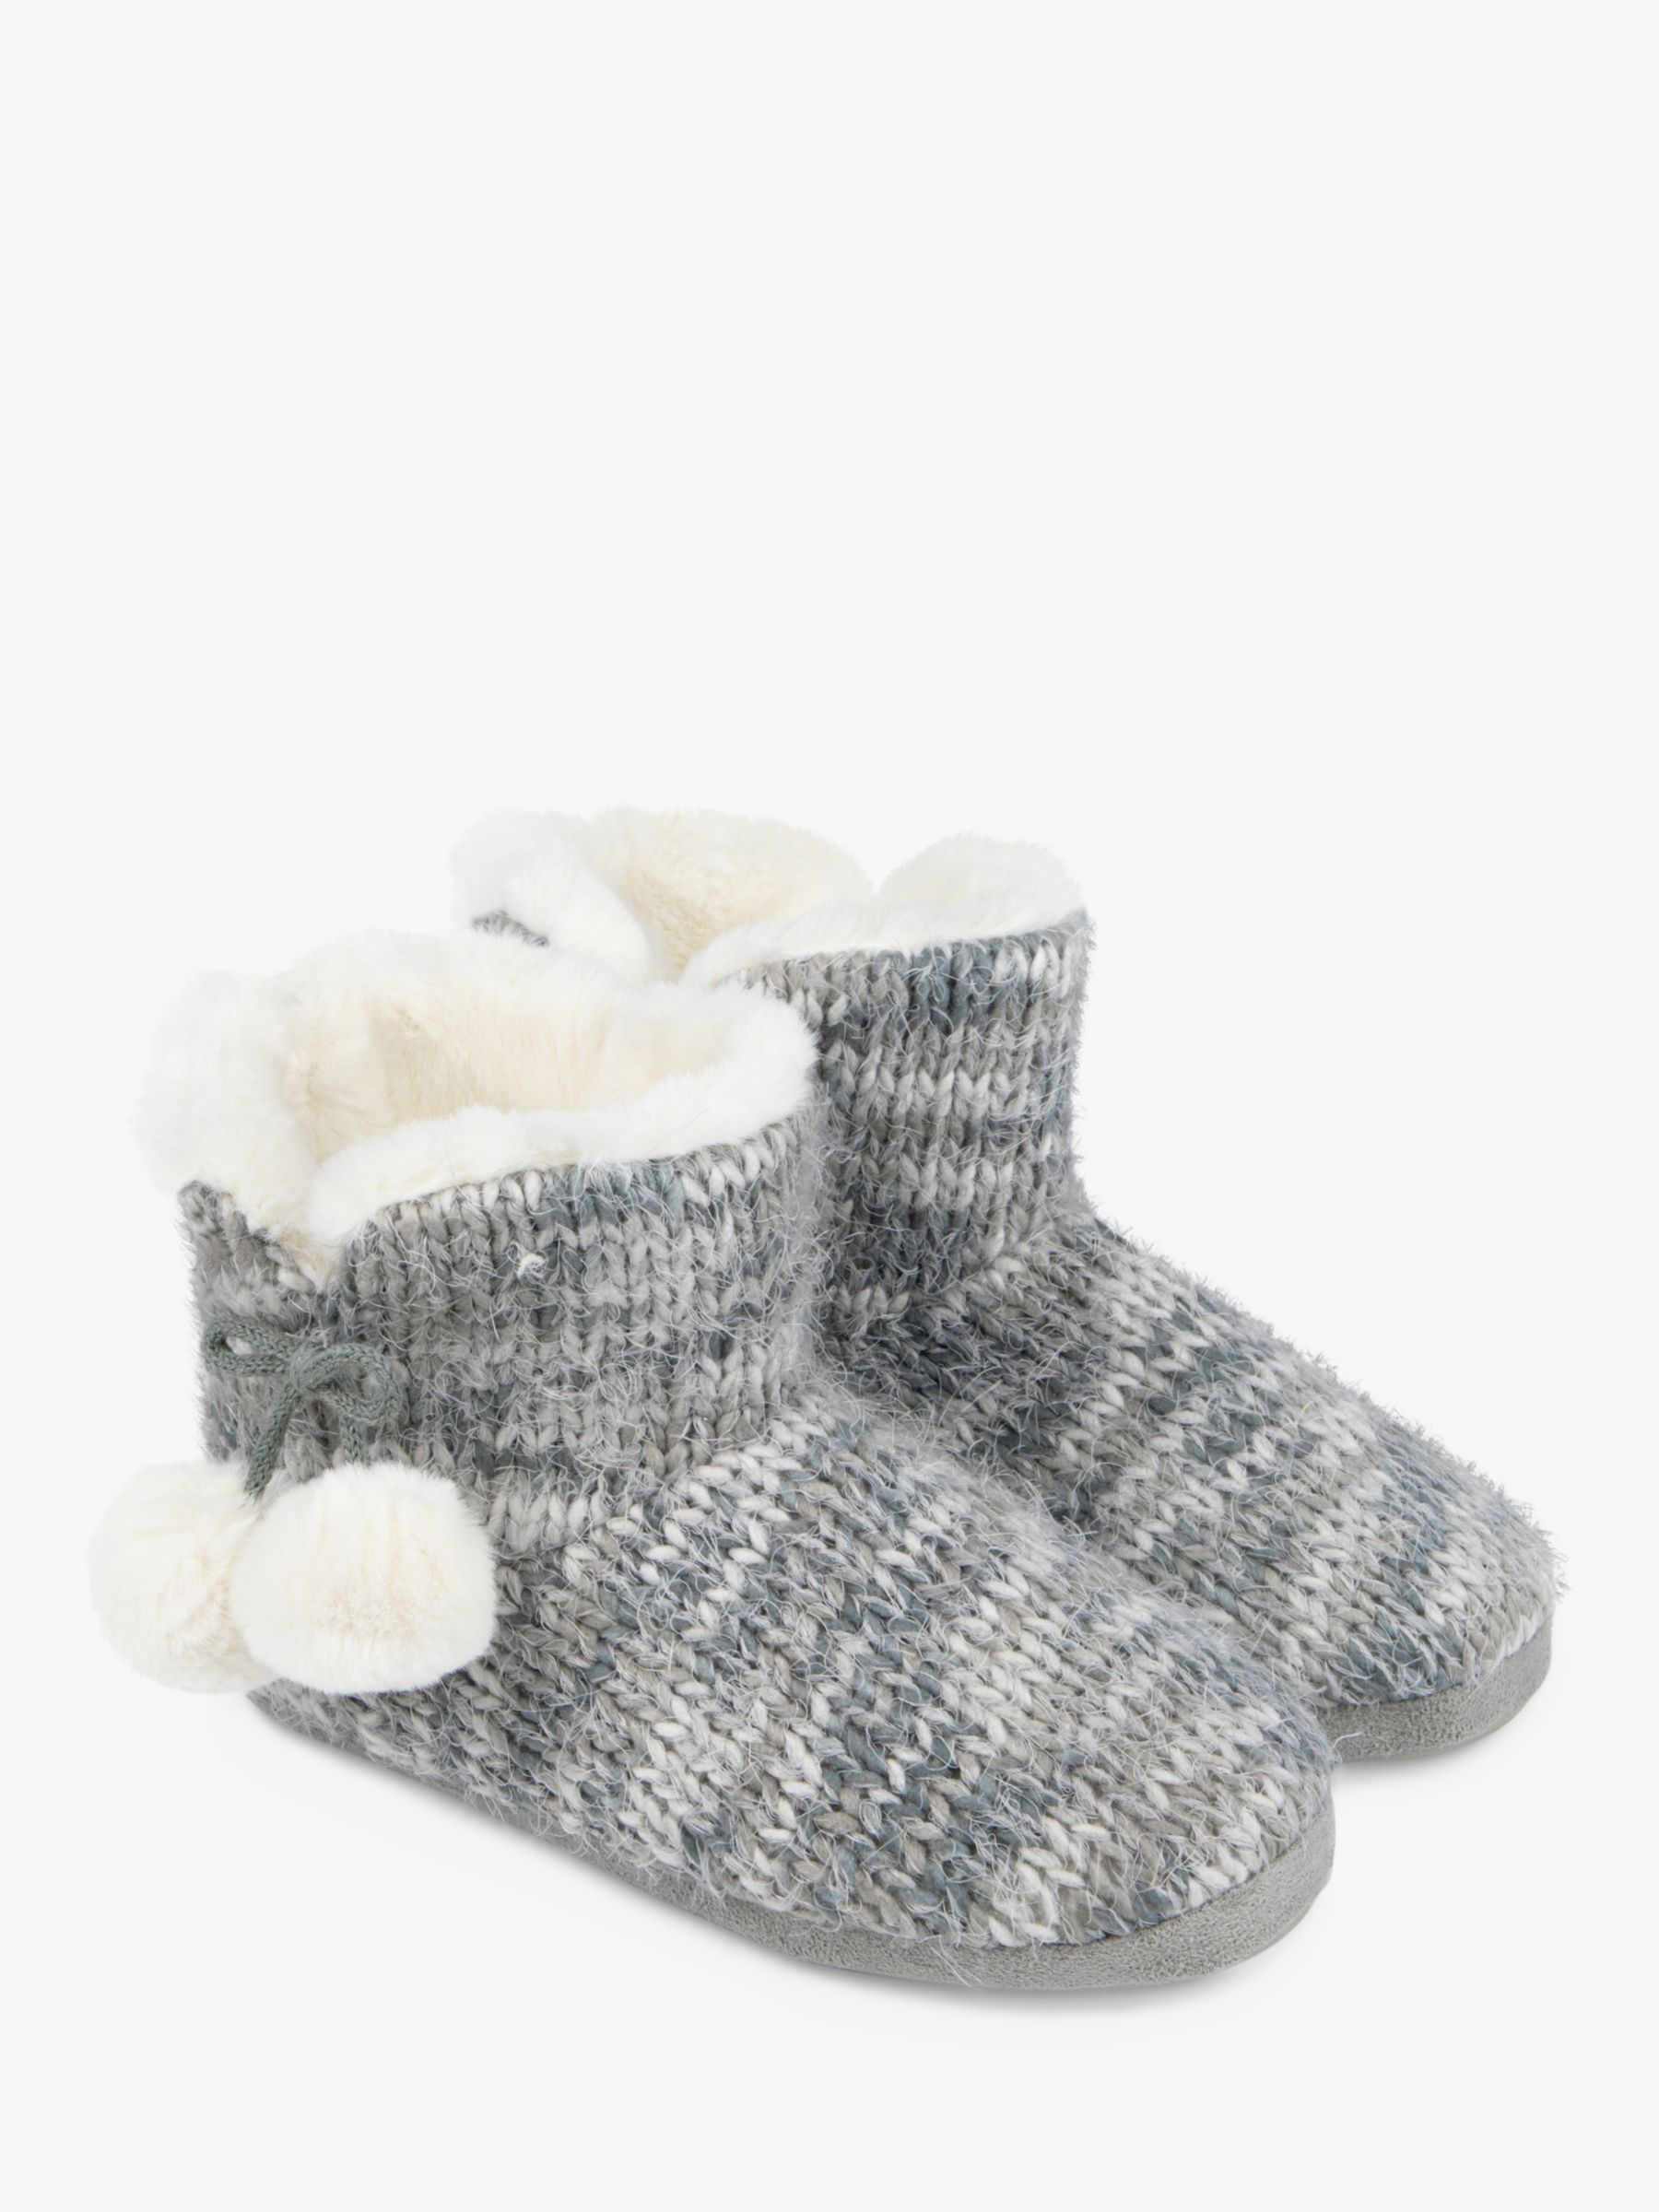 Buy totes Knitted Slipper Boots, Grey Online at johnlewis.com